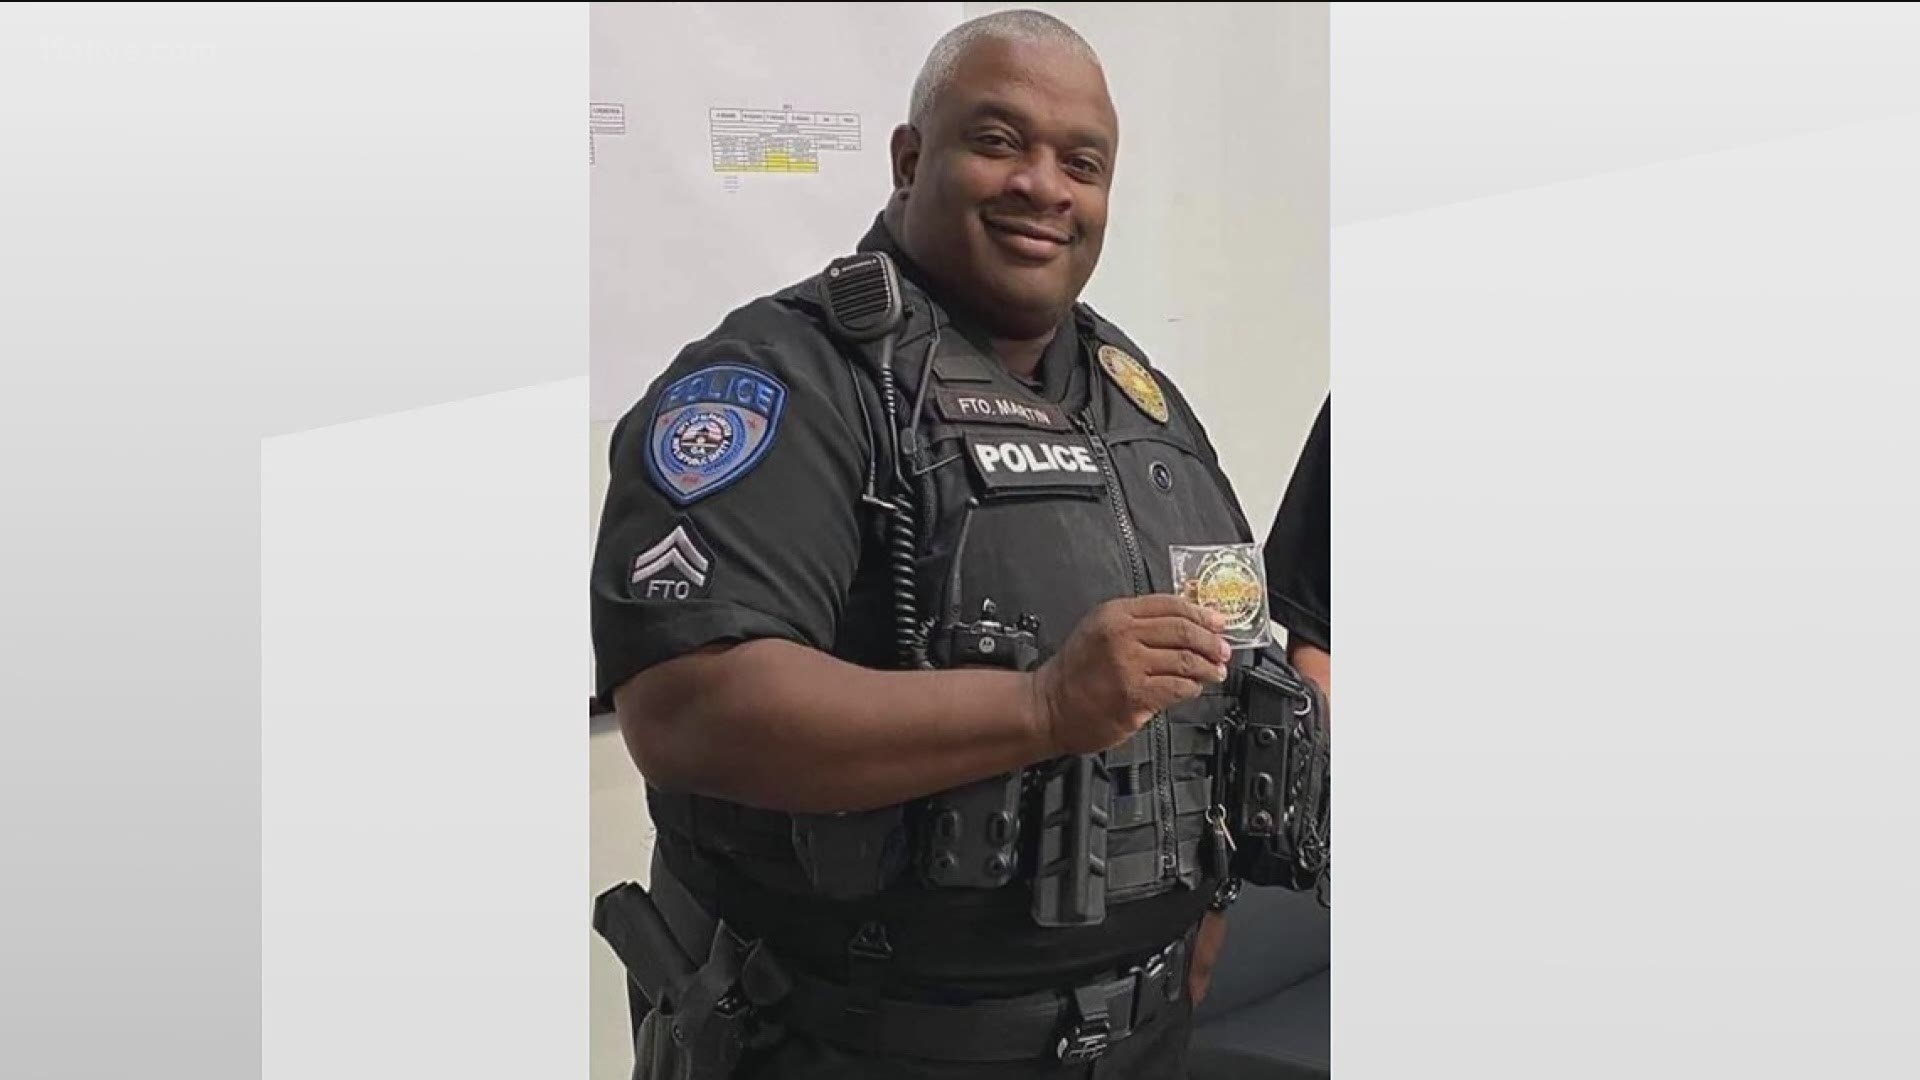 Officer Martin's funeral will be held on Friday.